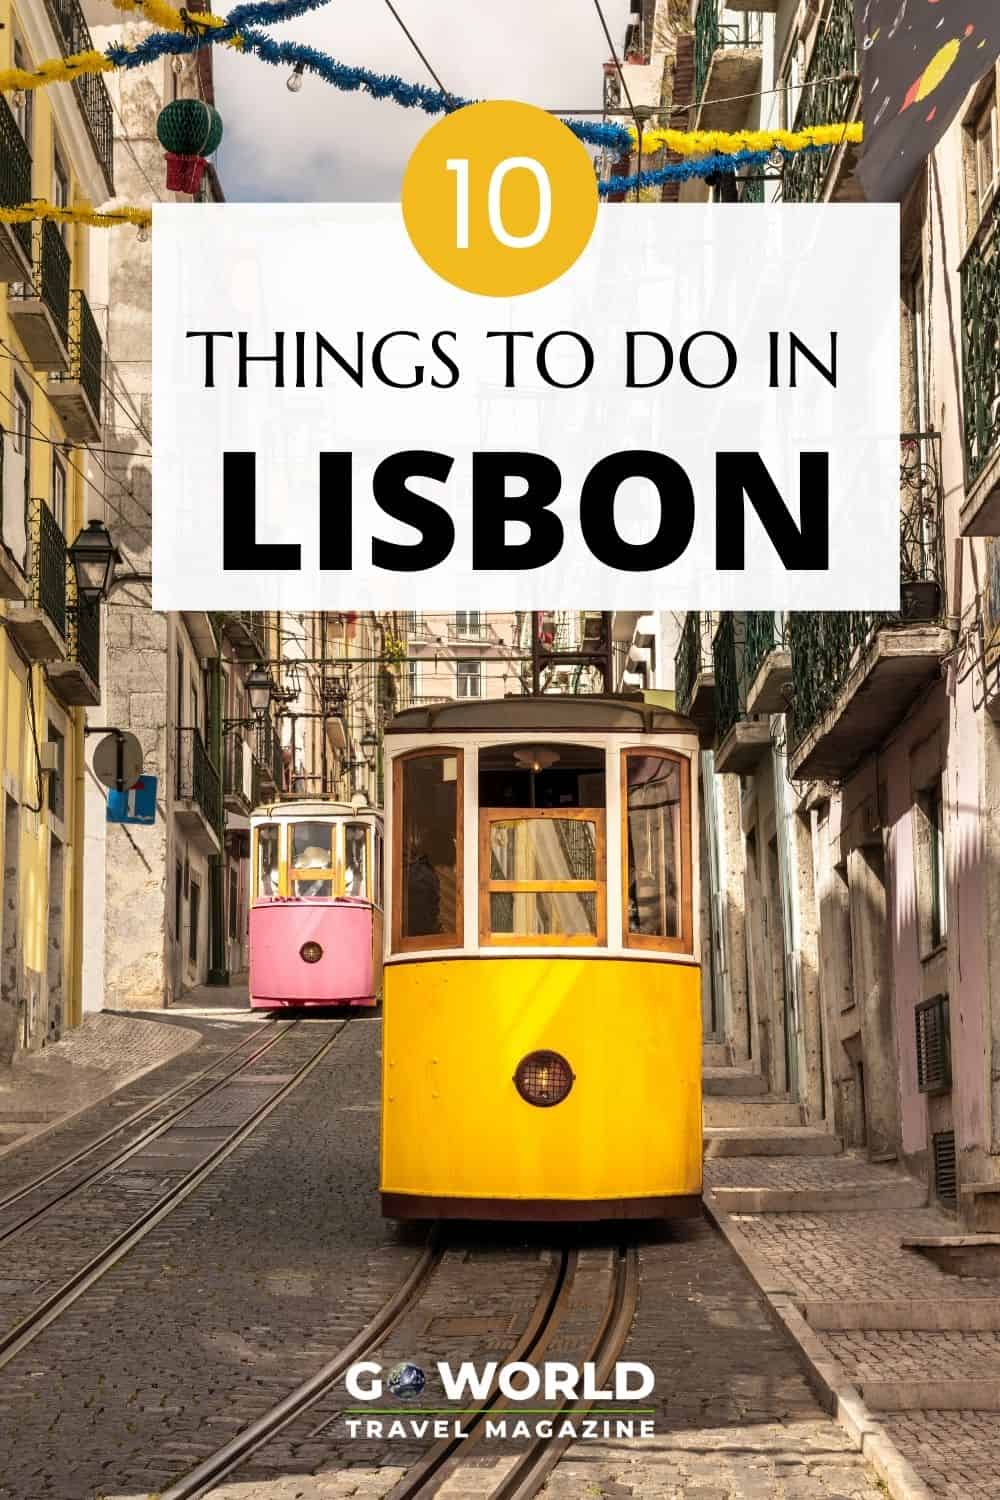 Lisbon, Portugal is a capitol city and top tourist destination. Castles, markets, nightlife and gastronomy: just a few things to do in Lisbon. #Portugal #Lisbon #ThingstodoinLisbon